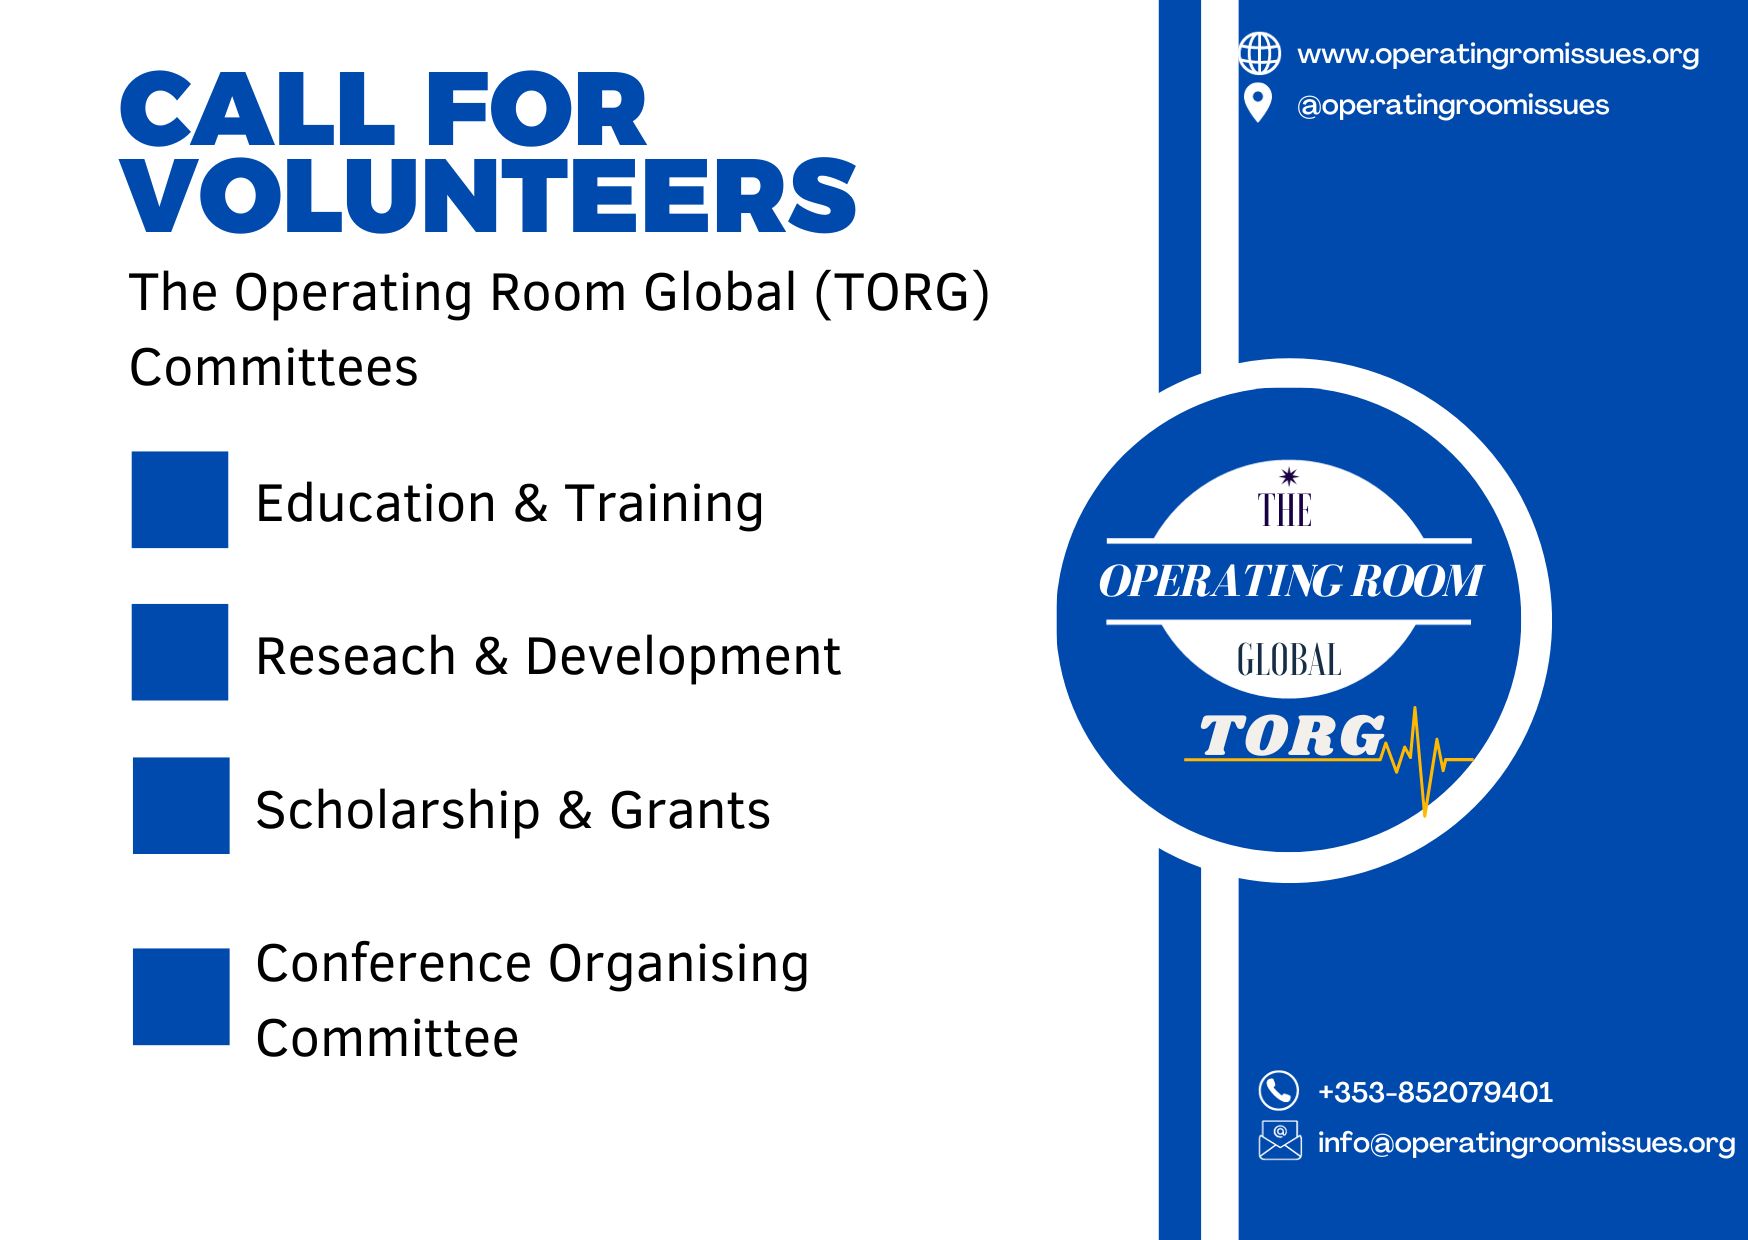 Call for Volunteers! Join The Operating Room Global (TORG) and make a difference in healthcare worldwide!